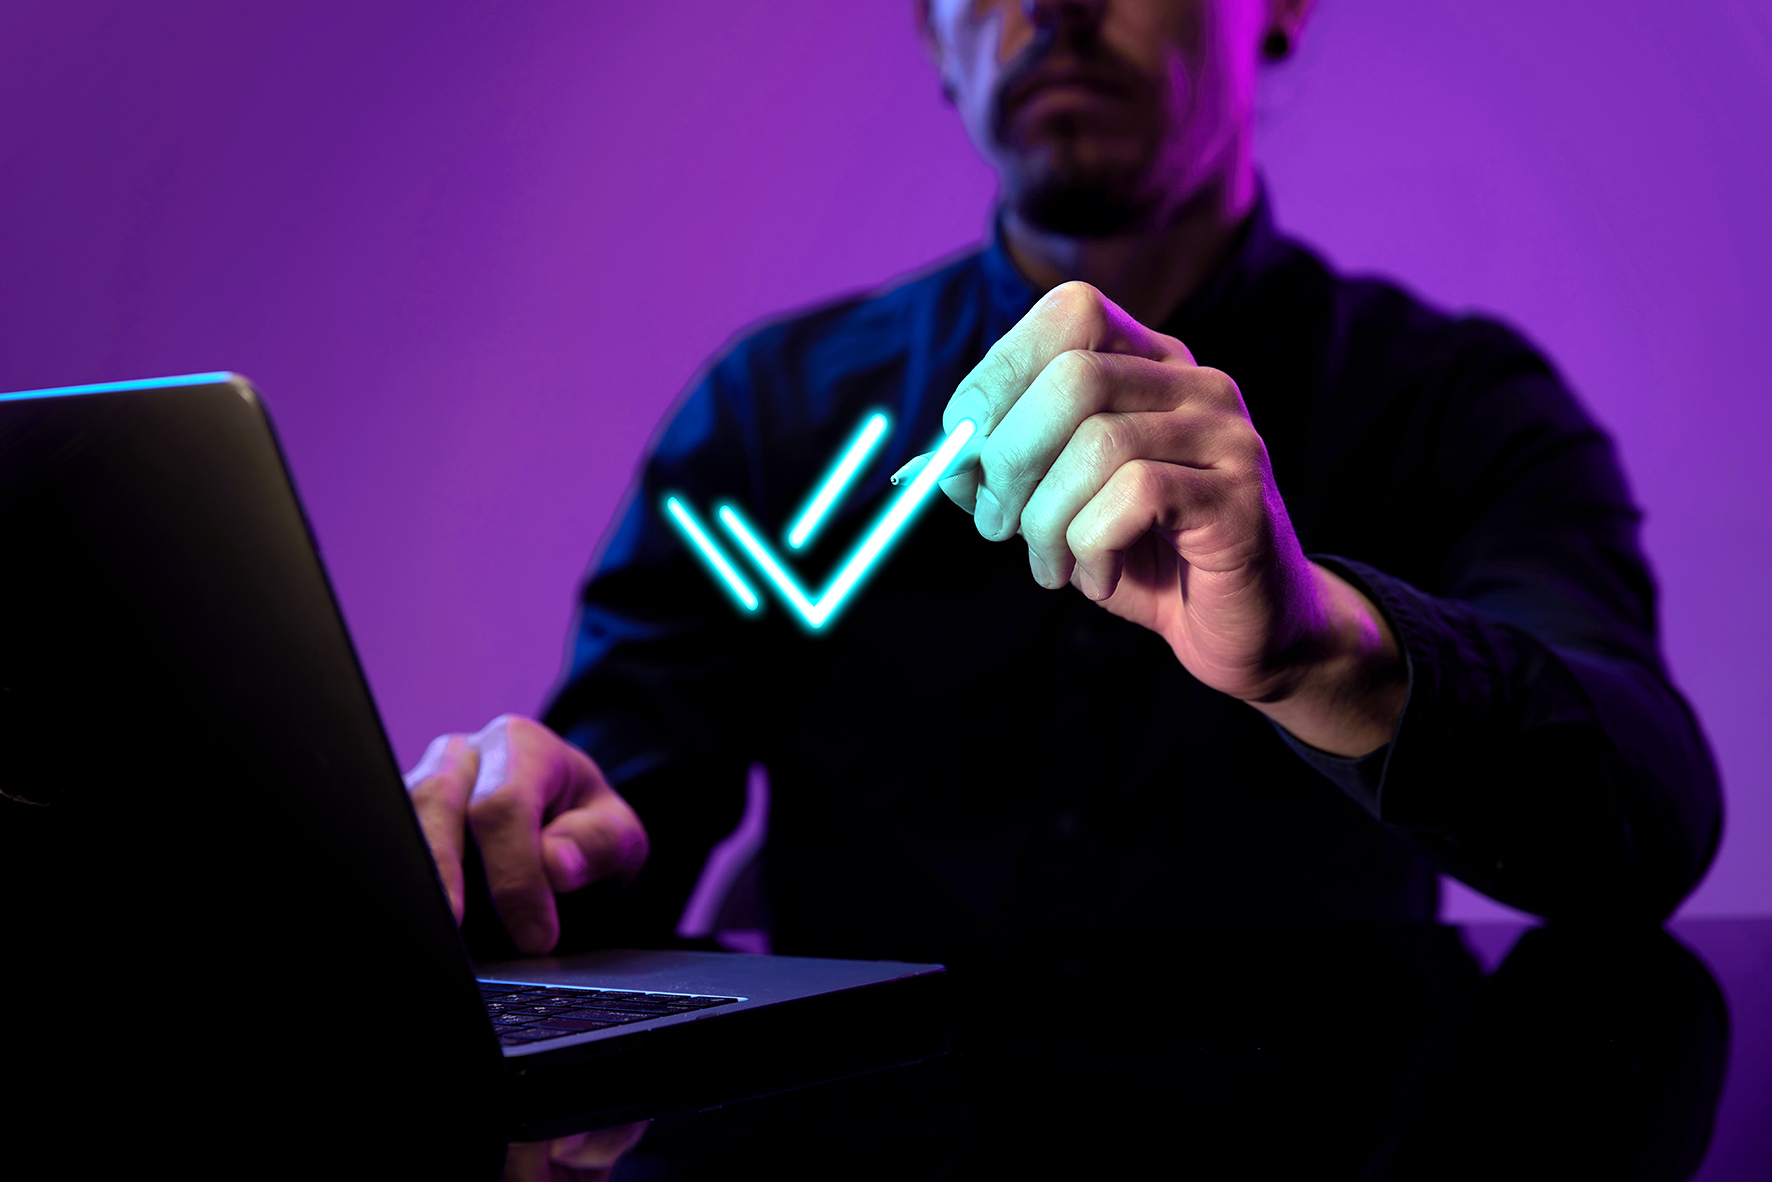 Man in front of laptop making virtual check marks, purple, neon